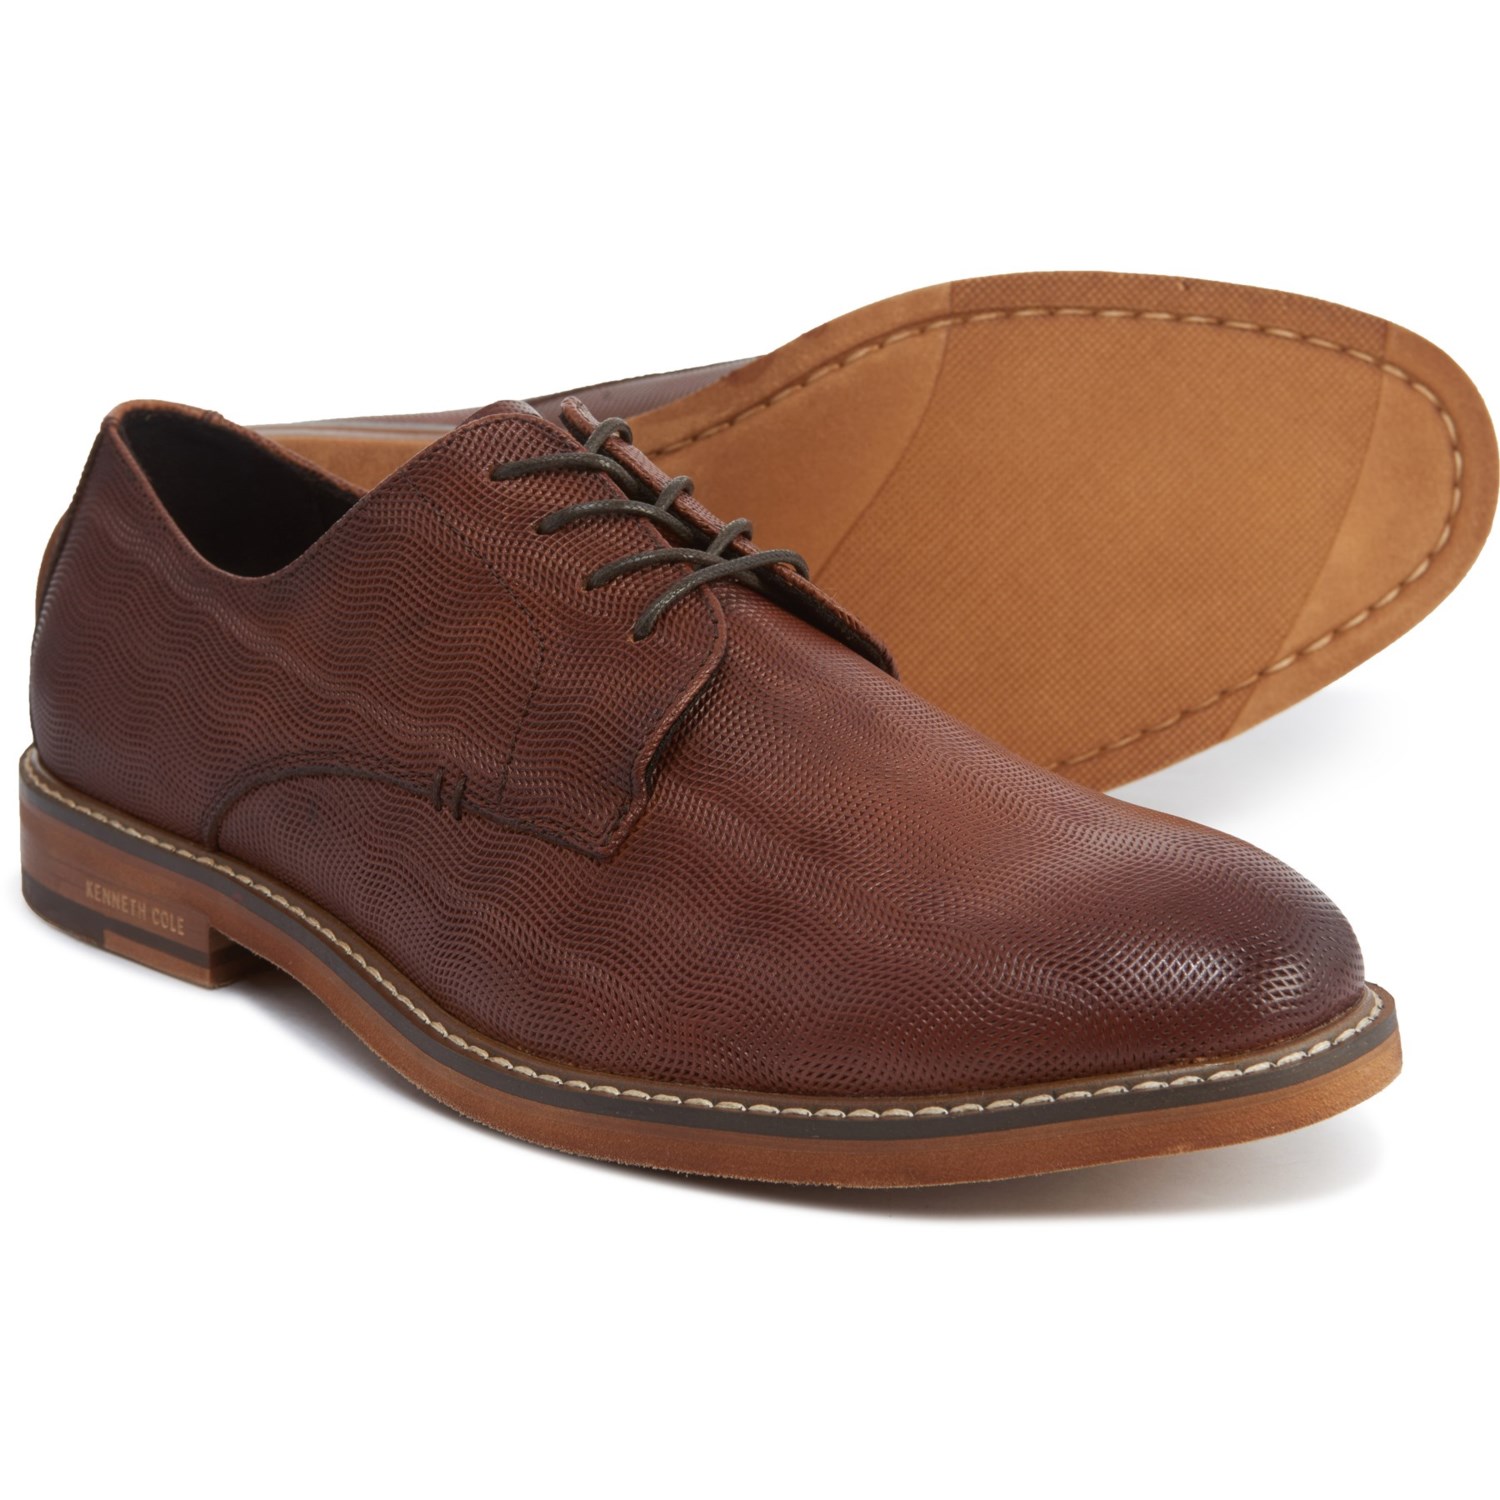 Kenneth Cole Dance Lace-Up Oxford Shoes 